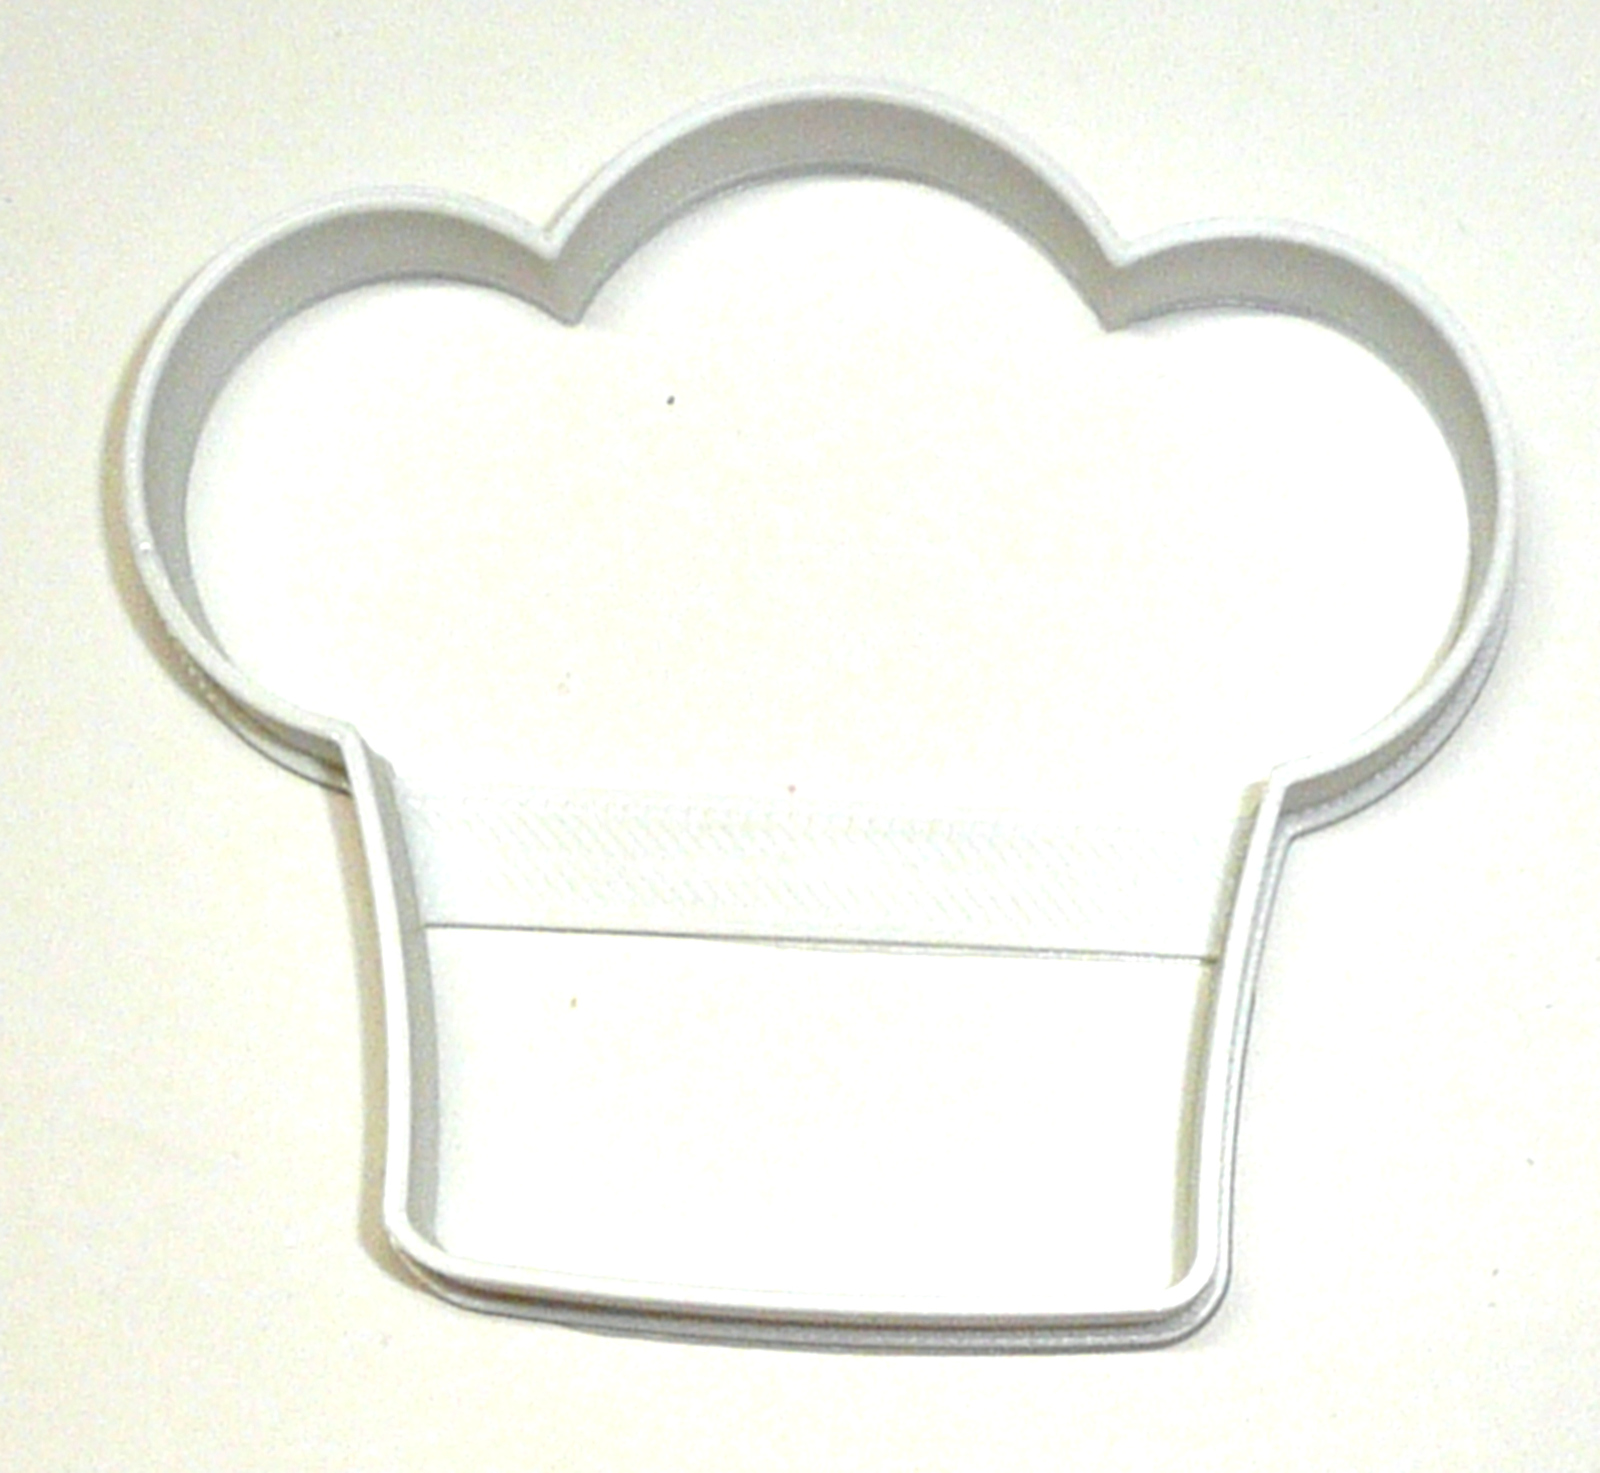 Chef Baker White Hat Cook Baking Food Culinary Arts Cookie Cutter USA PR2886